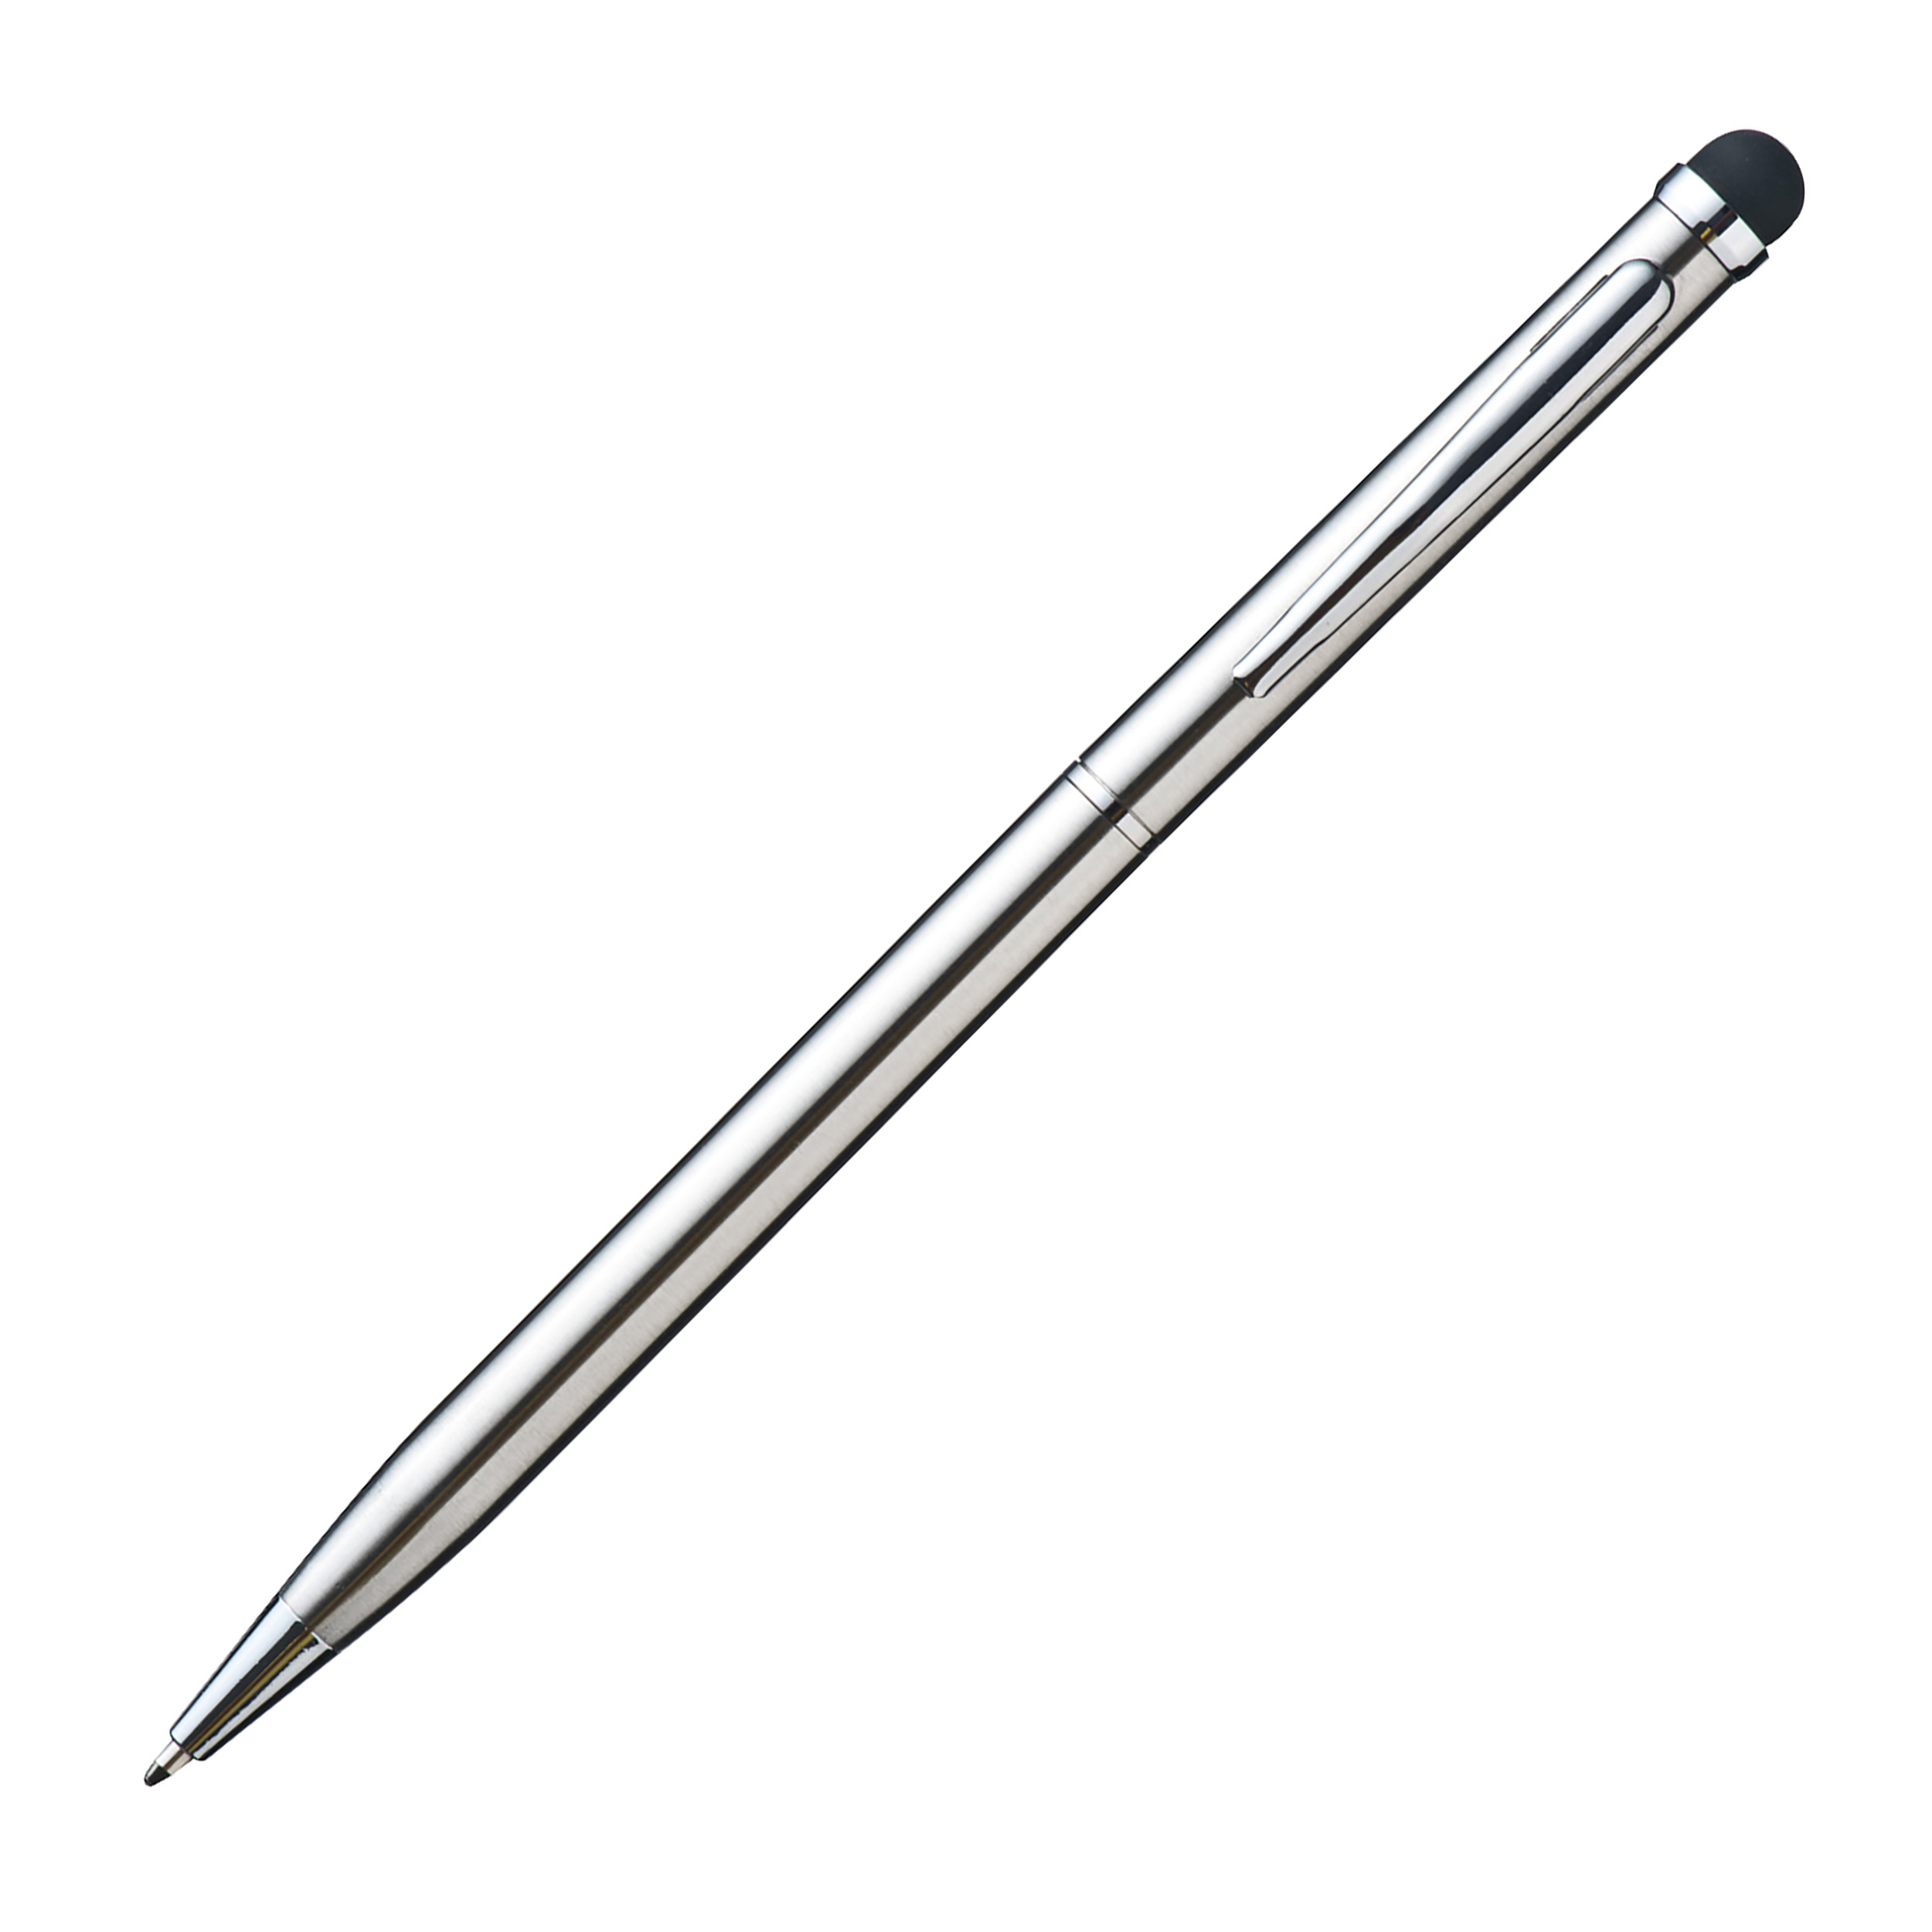 Ball pen made of stainless steel with touch pad